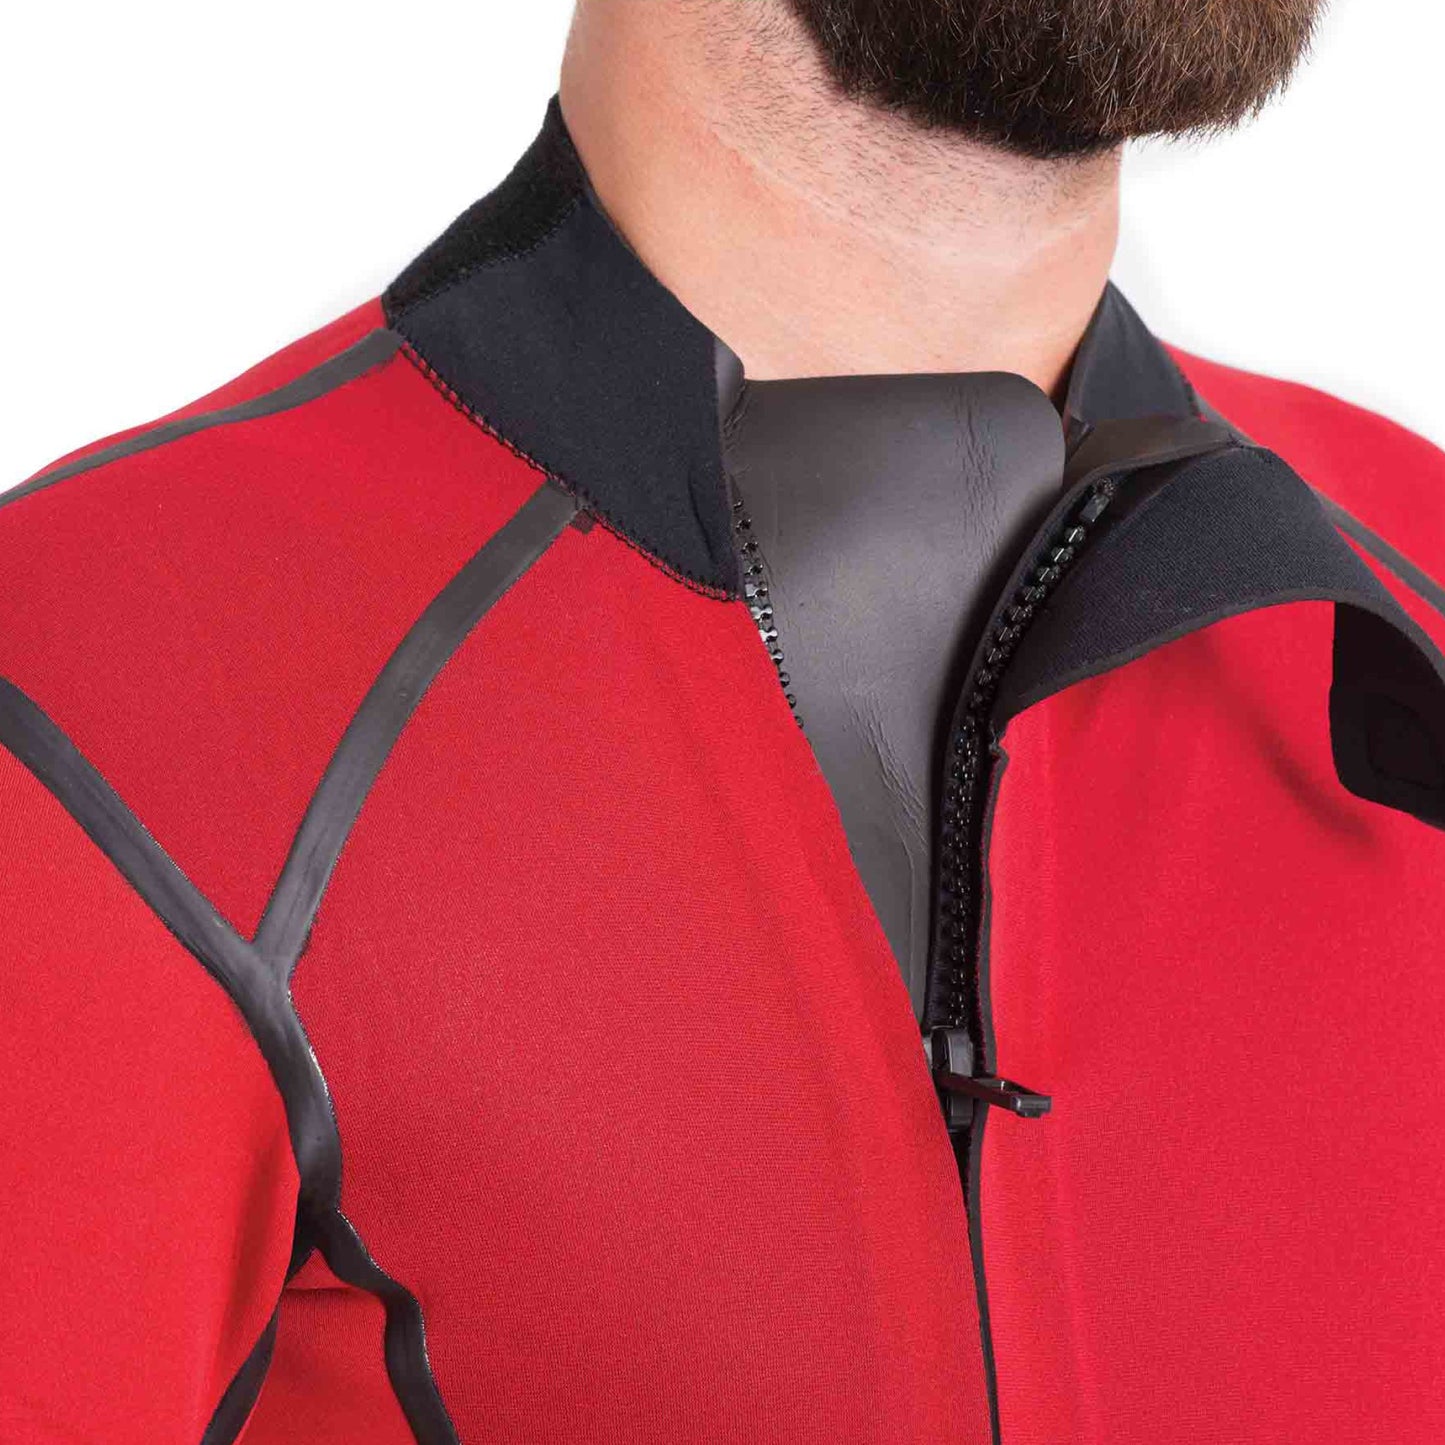 IONIC RX5 5mm Rescue Wetsuit